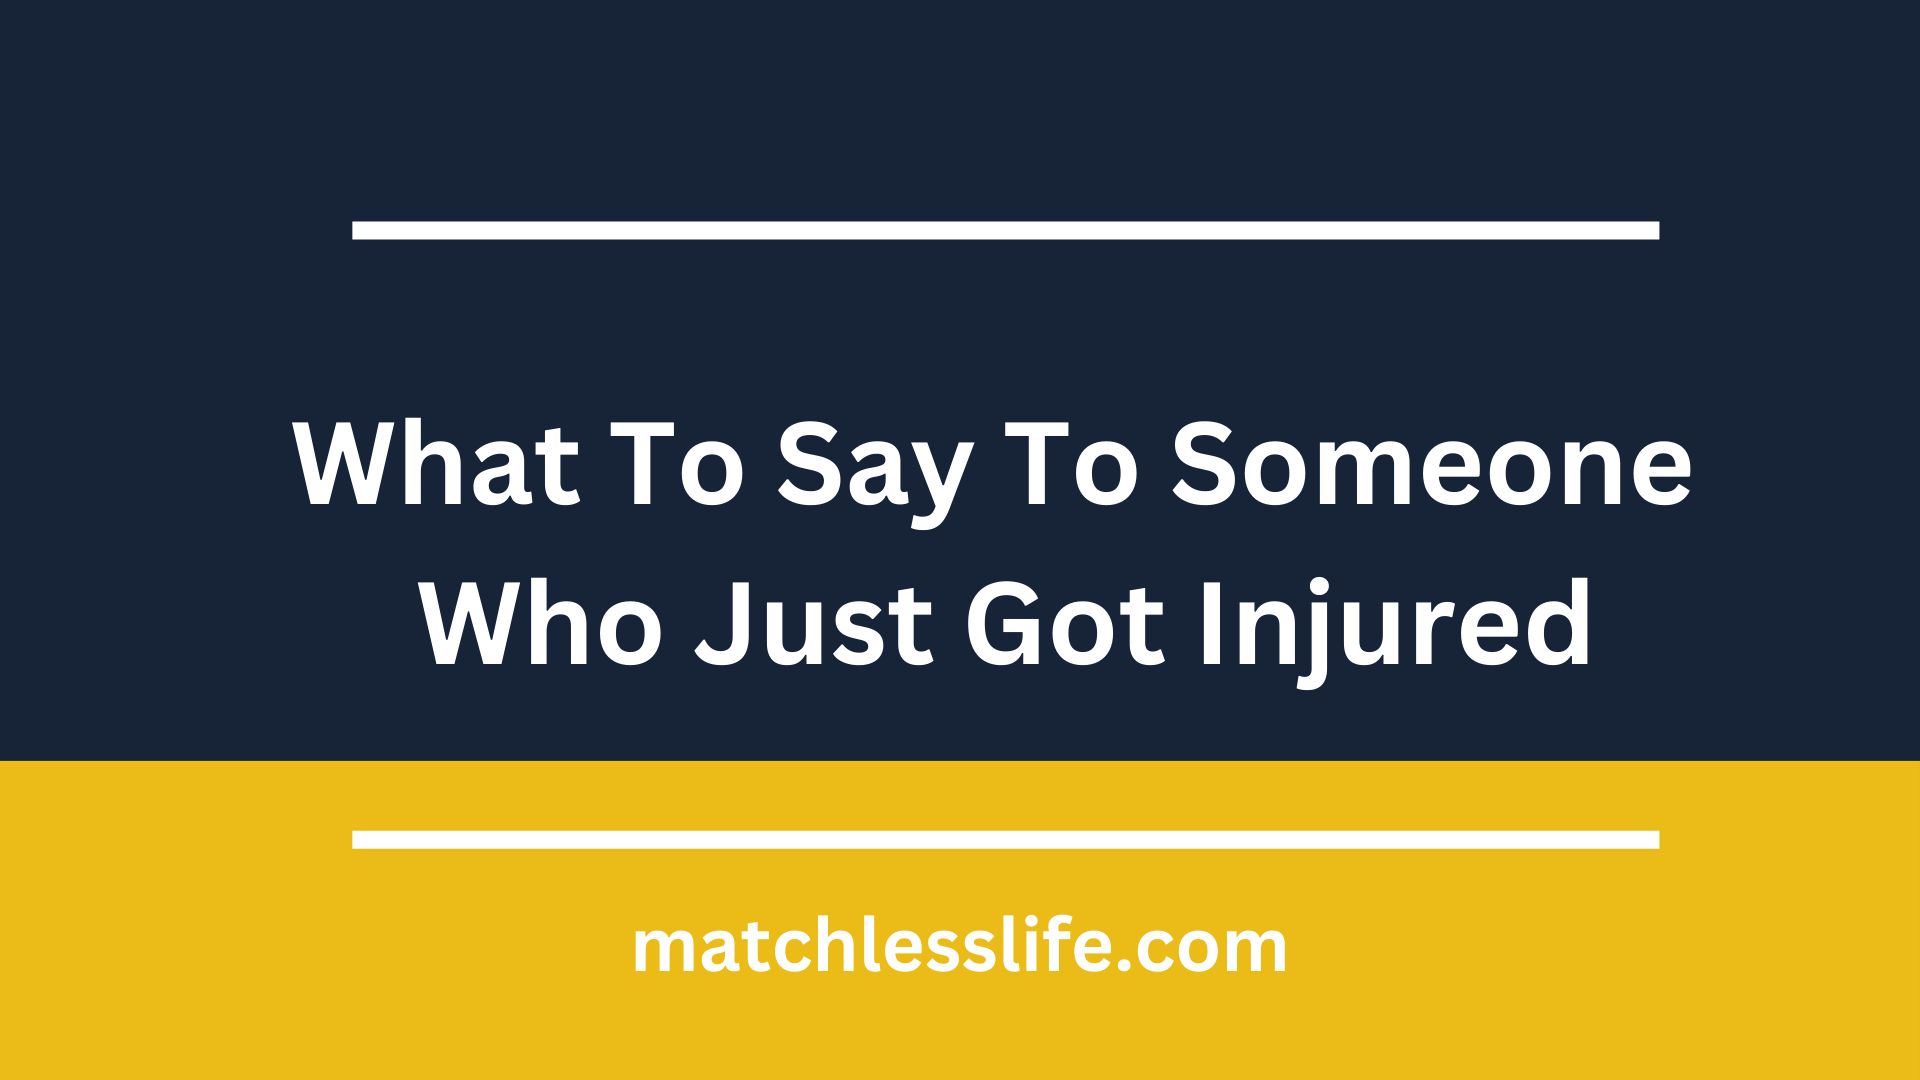 What To Say To Someone Who Just Got Injured